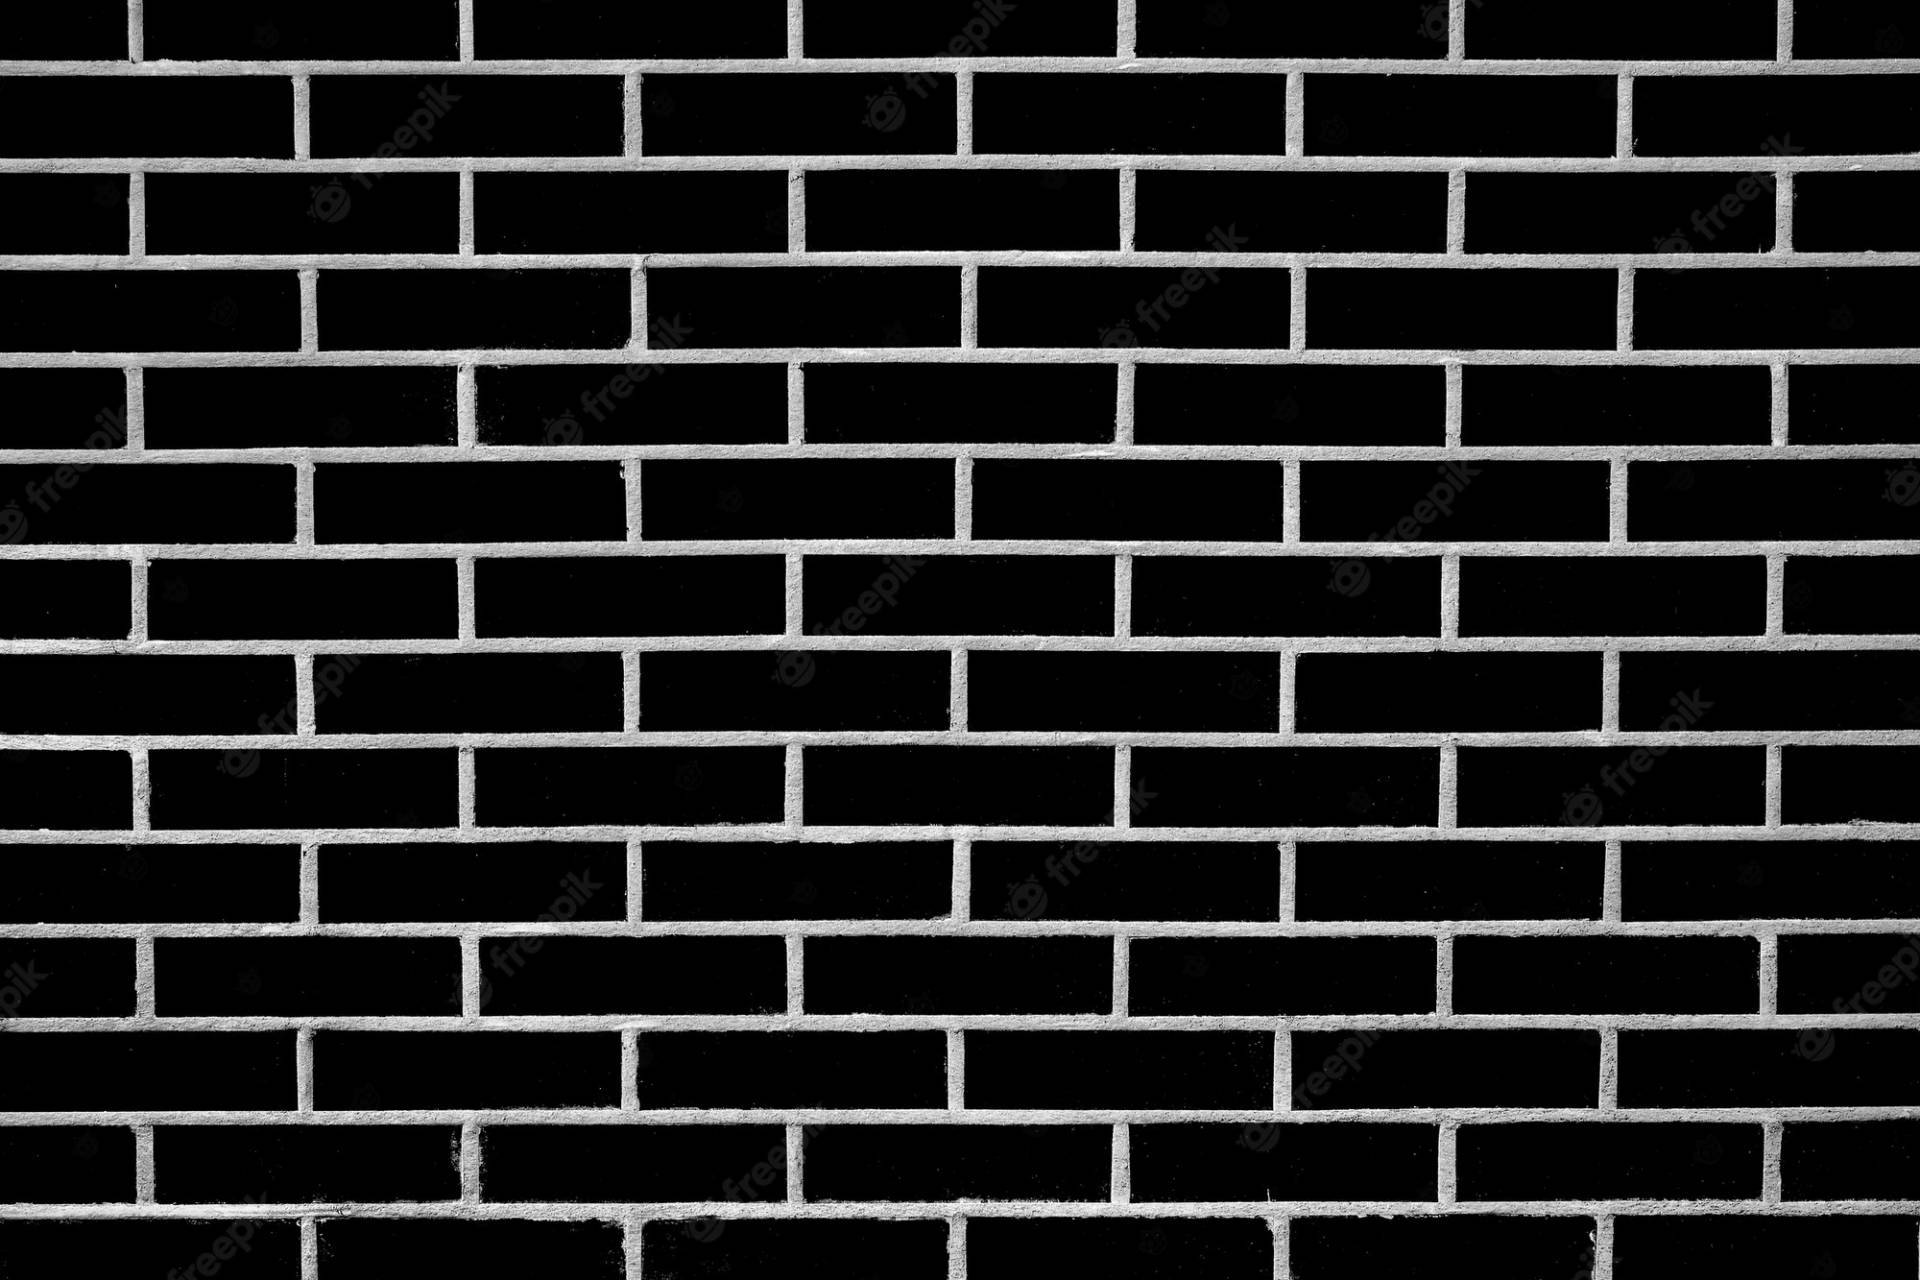 Striking Contrast of Solid Black and White Mortar Brick Texture Wallpaper